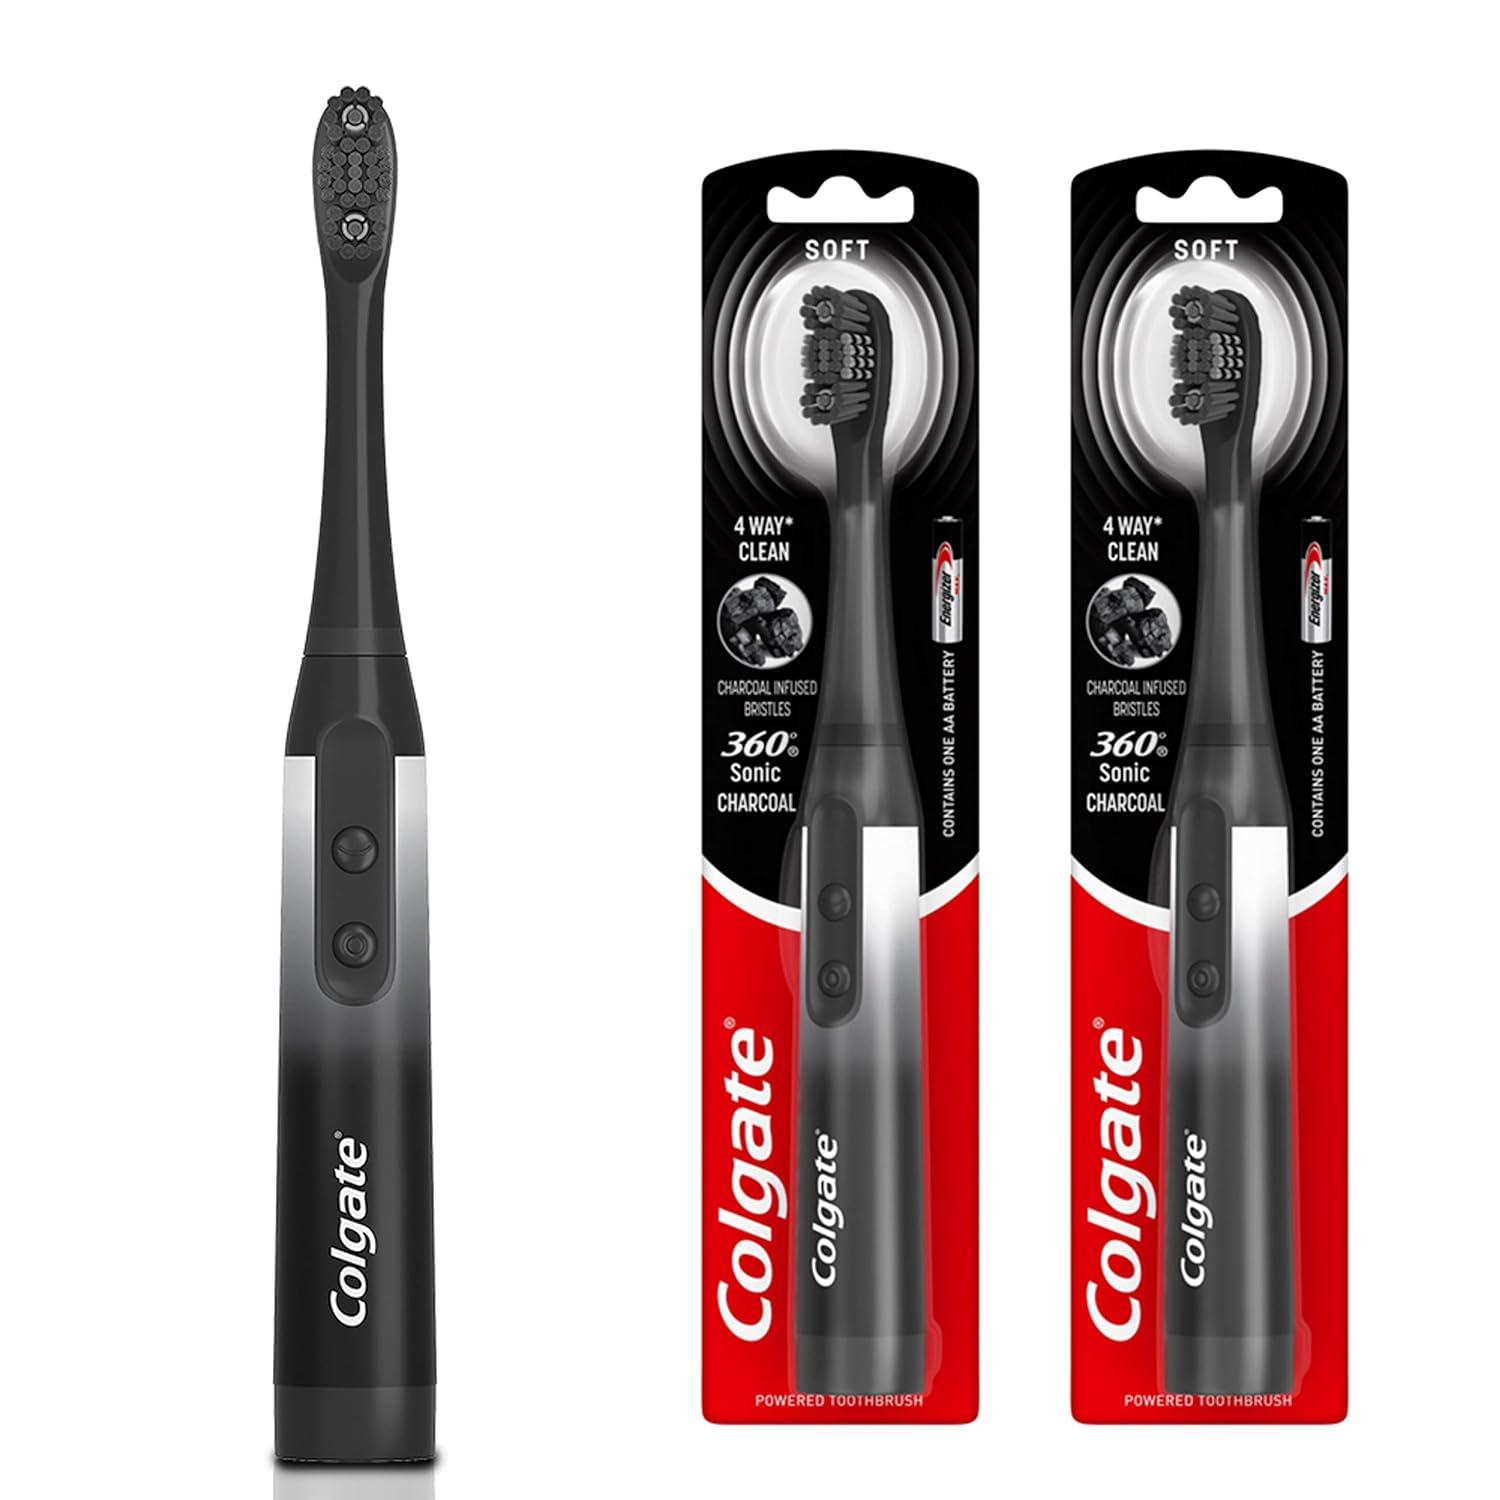 Colgate 360 Charcoal Sonic Powered Battery Toothbrush 2 Pack for $7.98